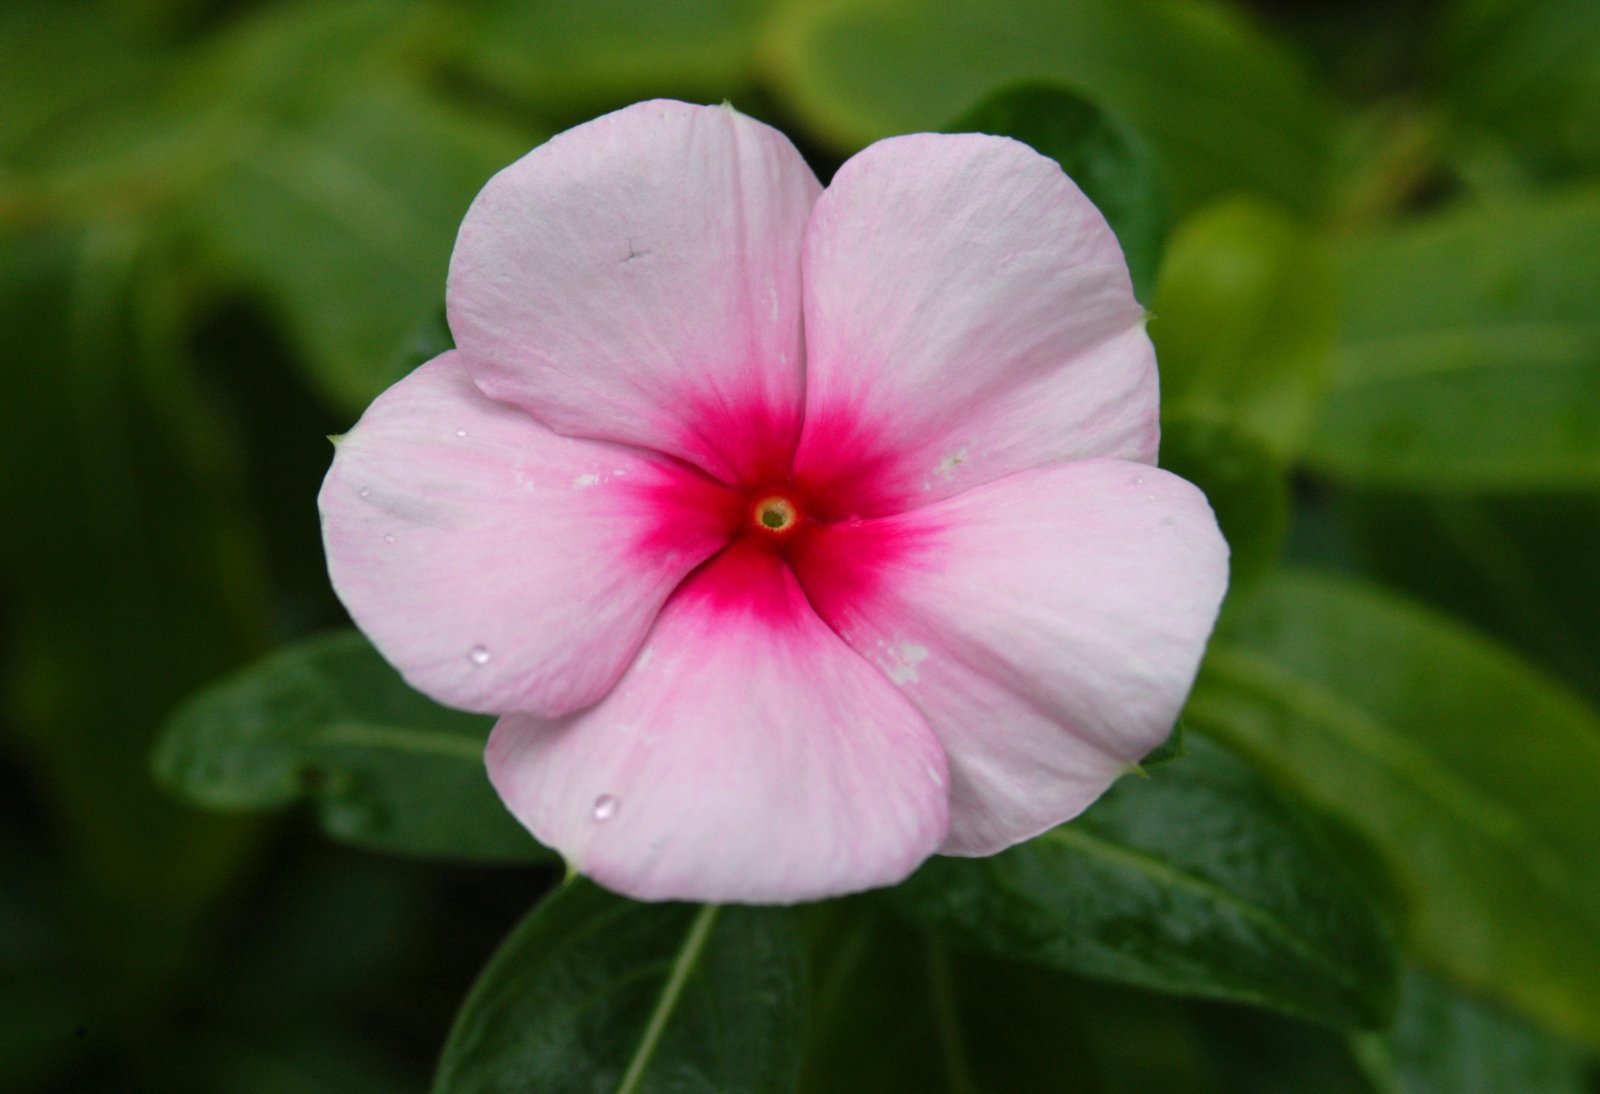 a white flower with pink and red center surrounded by greenery